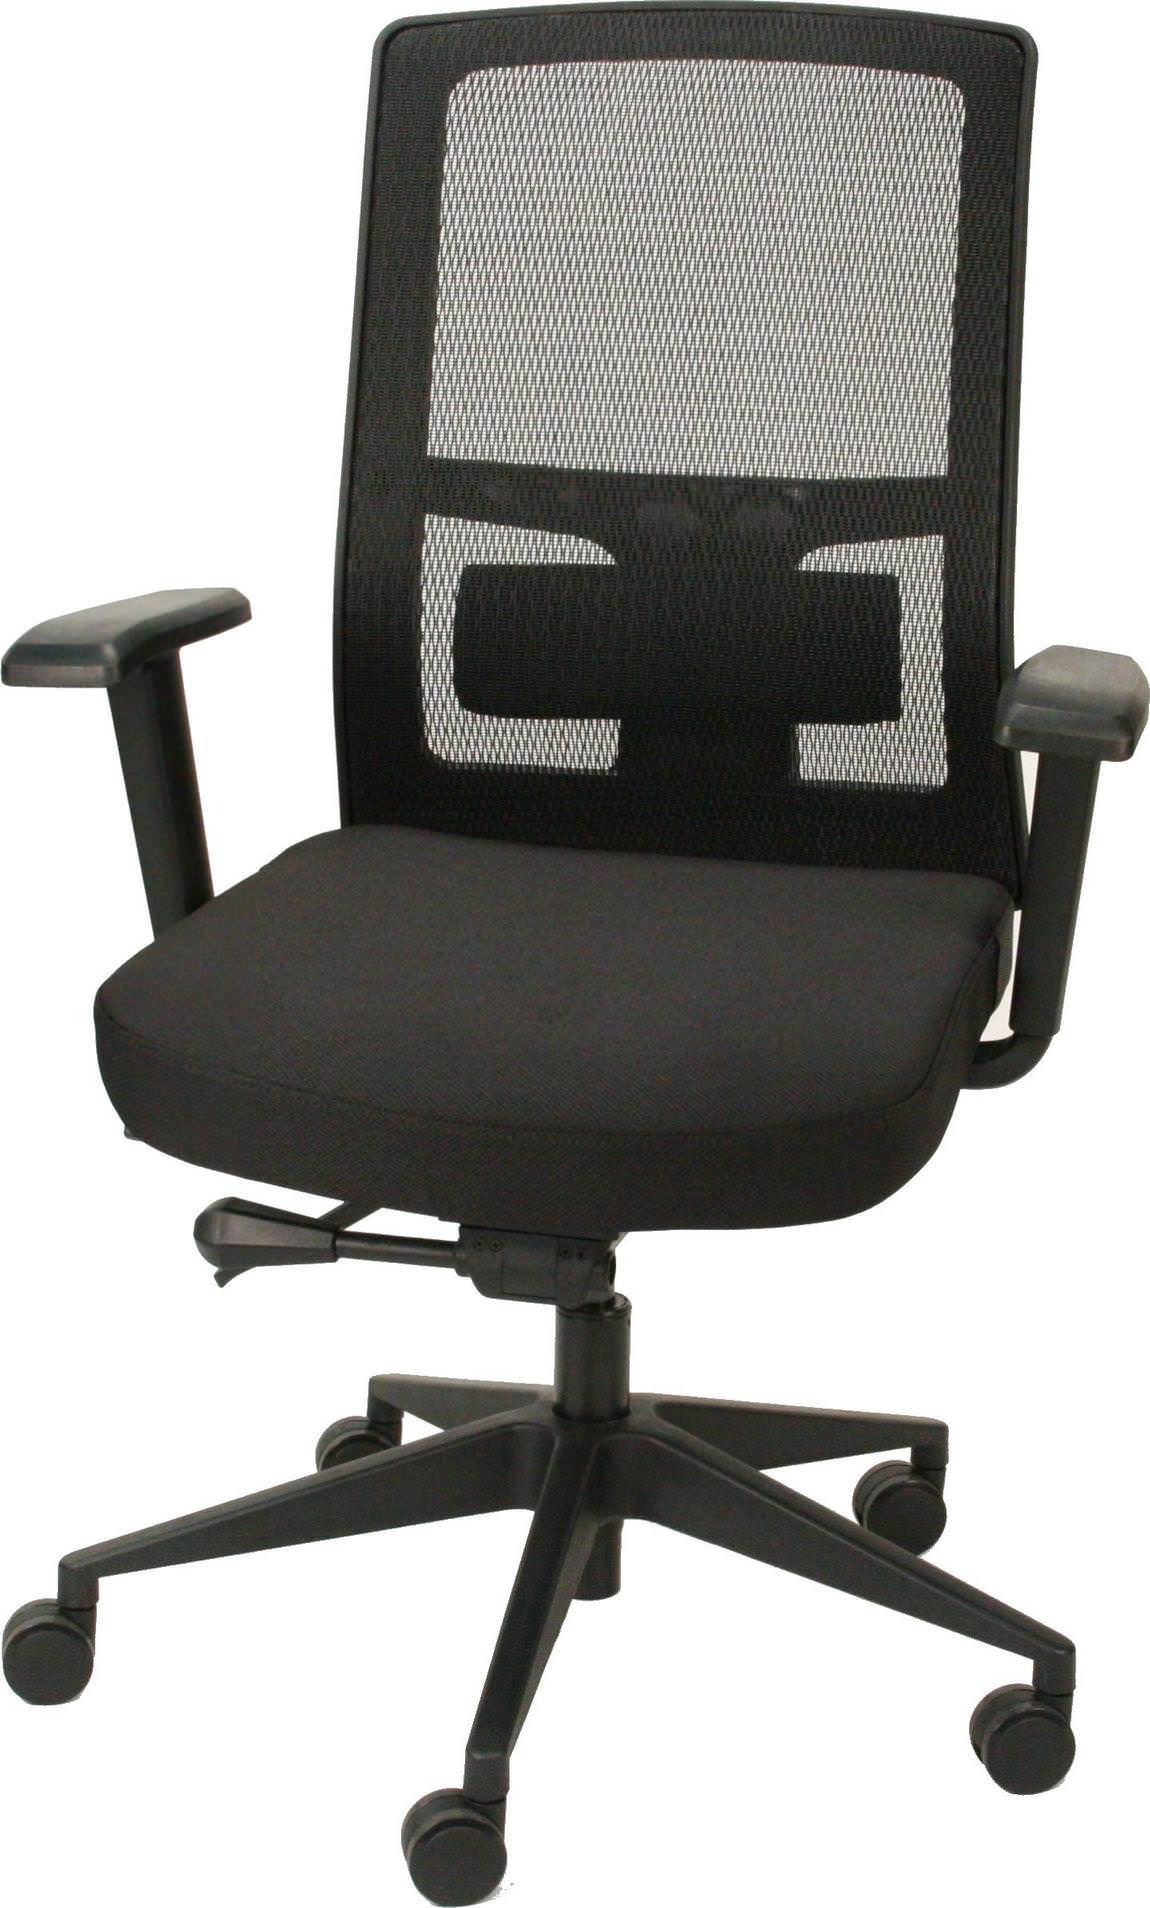 Highly Adjustable Heavy Duty Mesh Back Chair